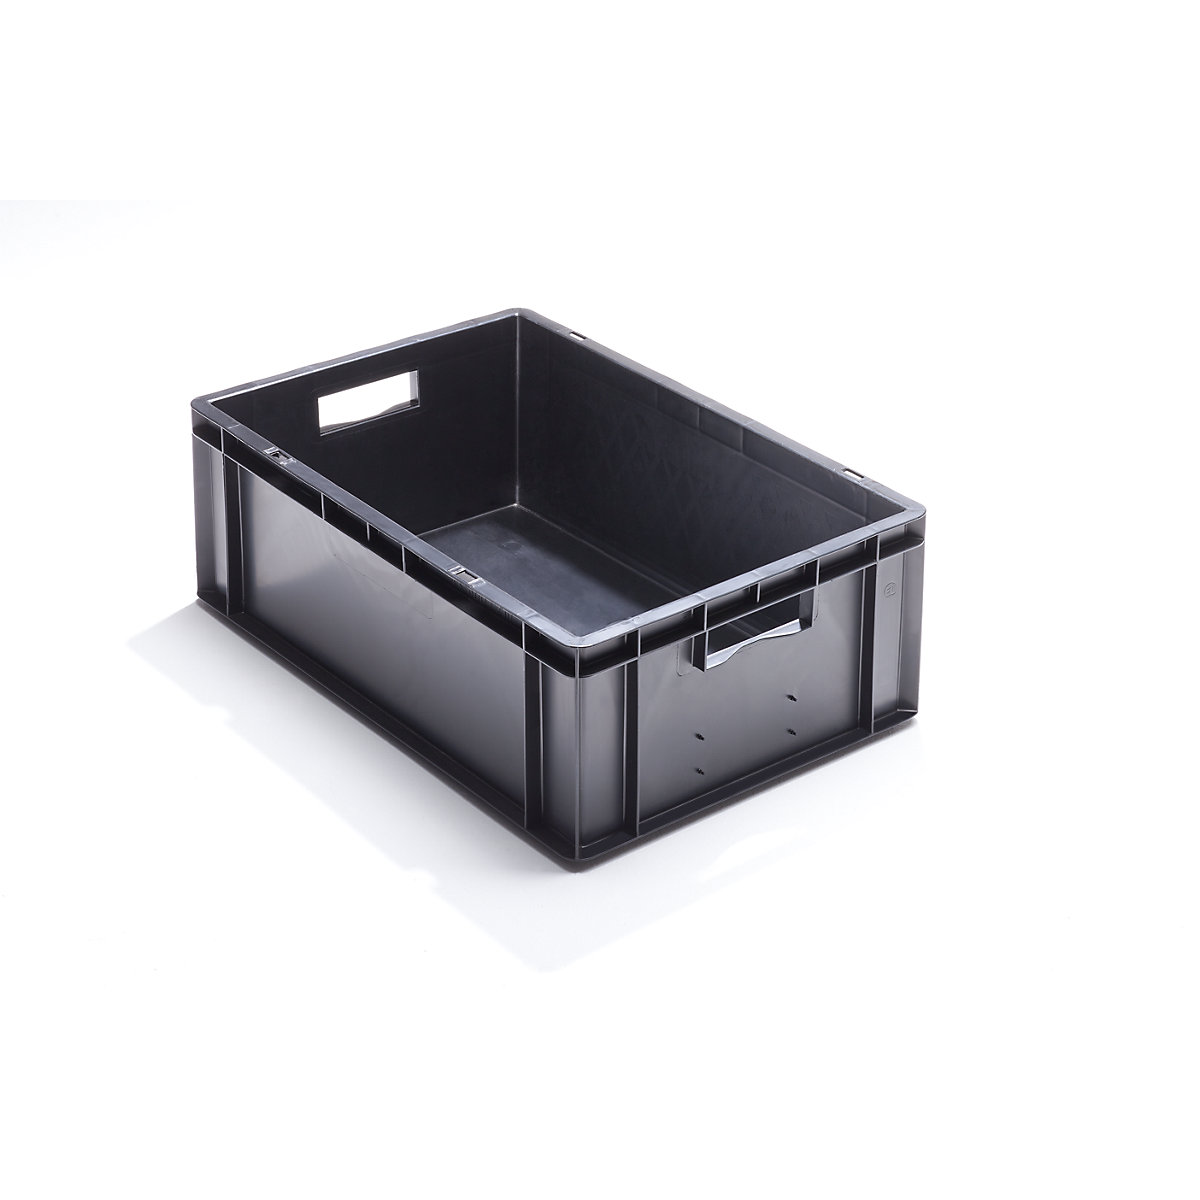 ESD stacking container made of polypropylene